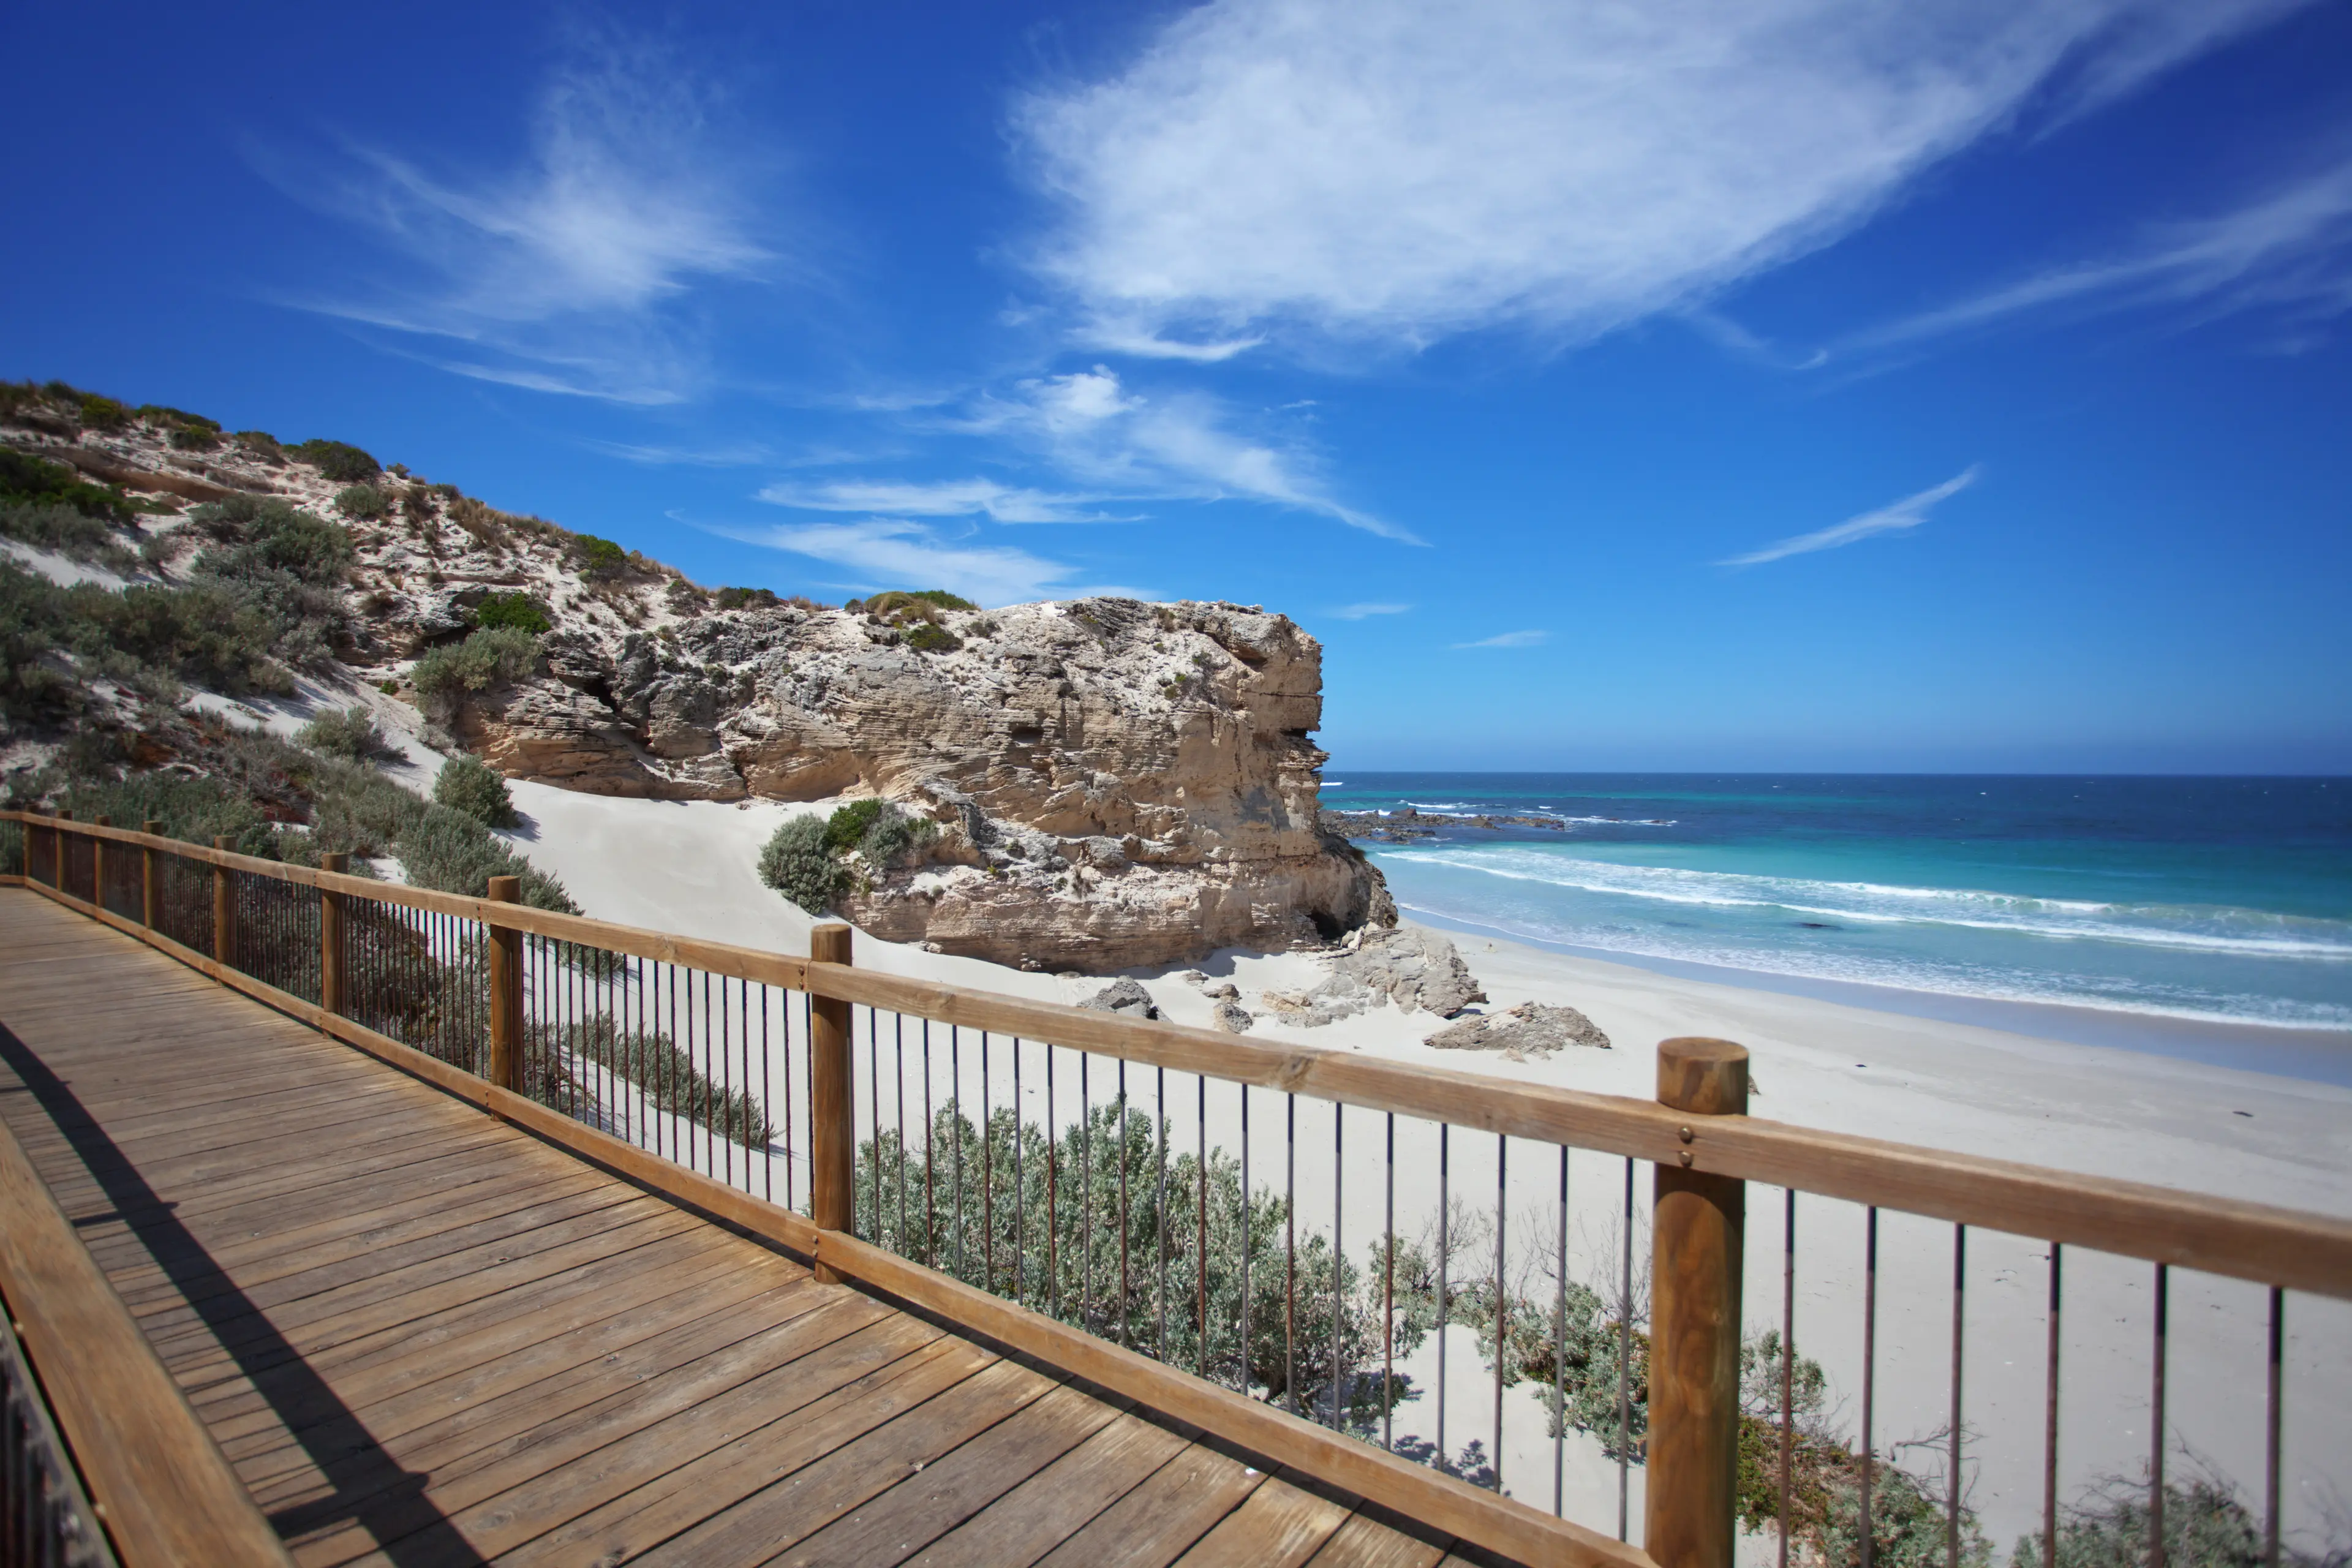 3-Day Family Relaxation and Sightseeing Trip to Kangaroo Island